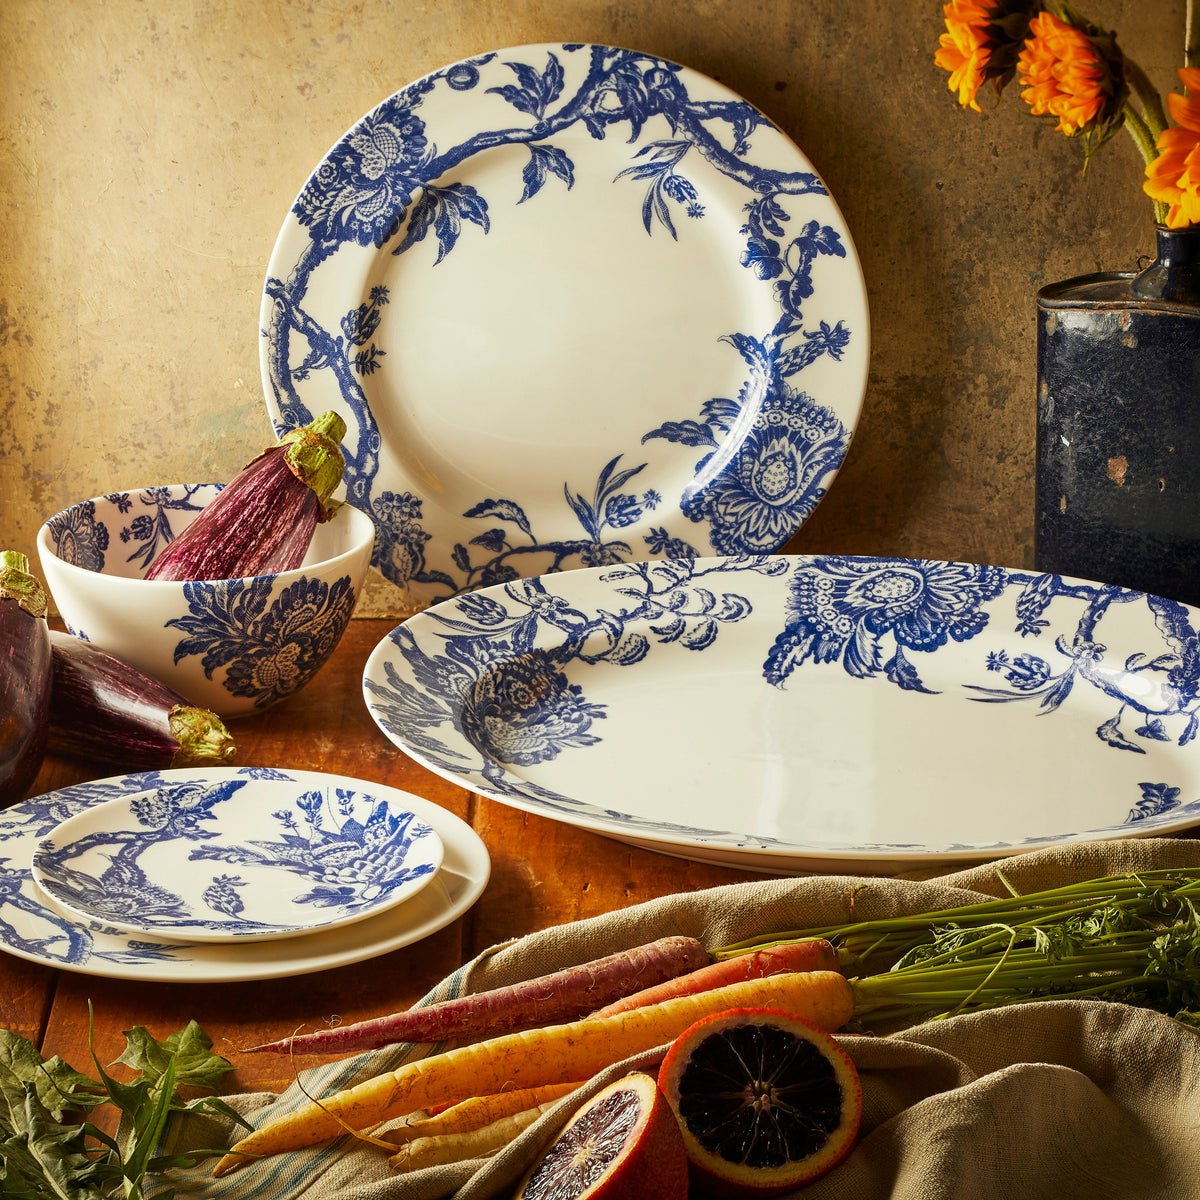 The blue Arcadia Collection by Caskata is displayed on a moody tabletop with fresh vegetables and flowers. The large oval platter, tall cereal bowl, dinner, salad and canapé plates are displayed.